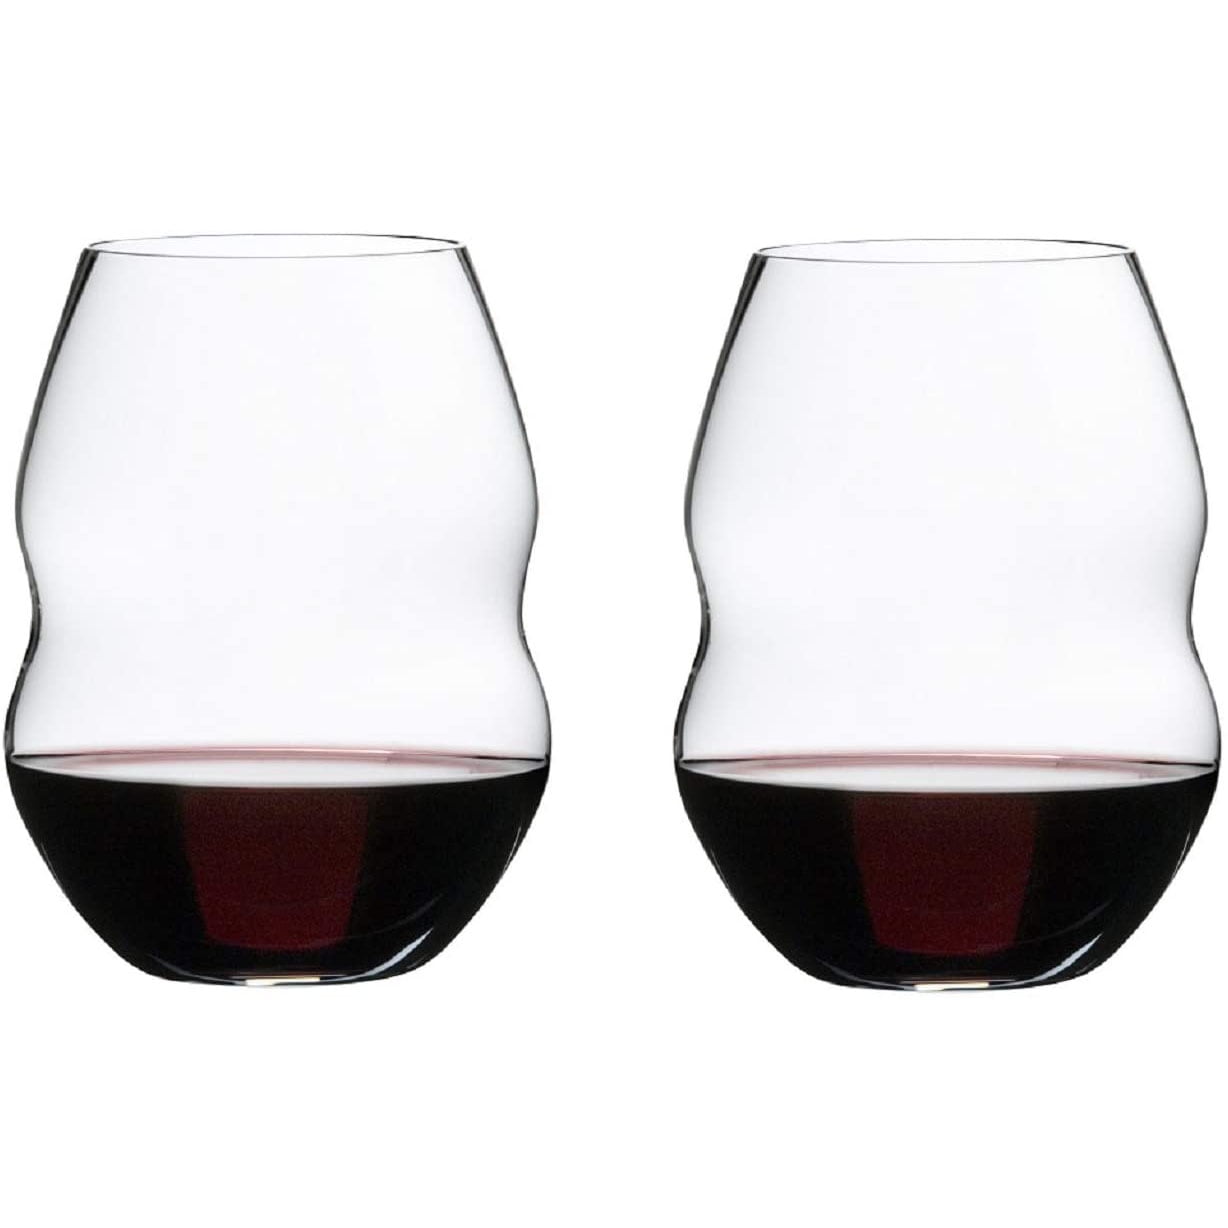 Riedel 10.4 oz. Spey Glass (Set of 4) 5515/02S3 - The Home Depot